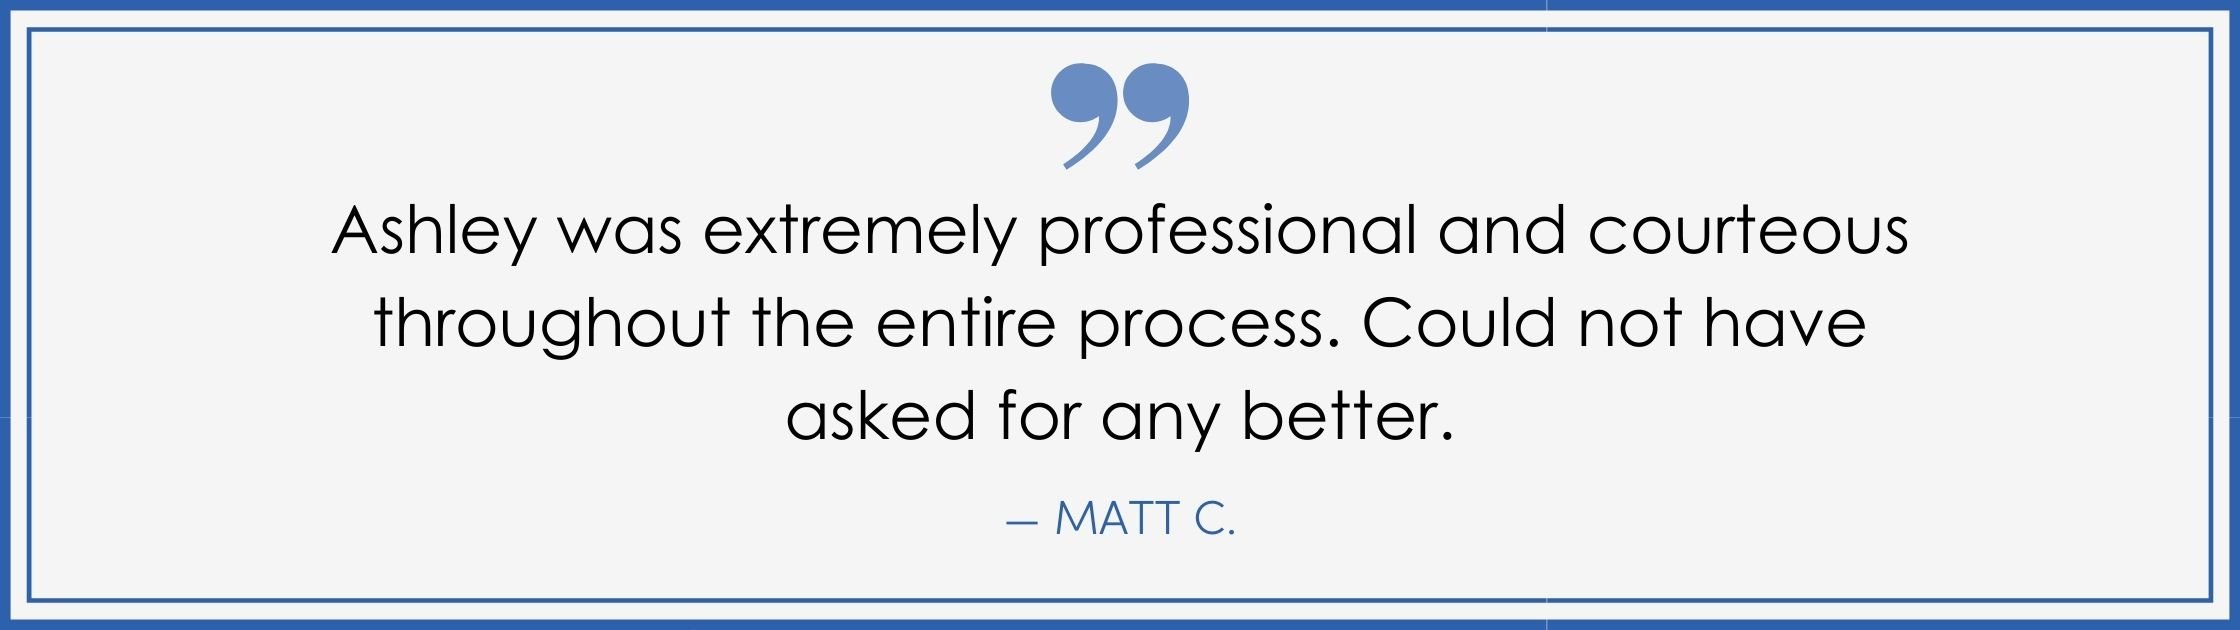 “Ashley was extremely professional and courteous throughout the entire process. Could not have asked for any better.” –Matt C. (Copy) (Copy)